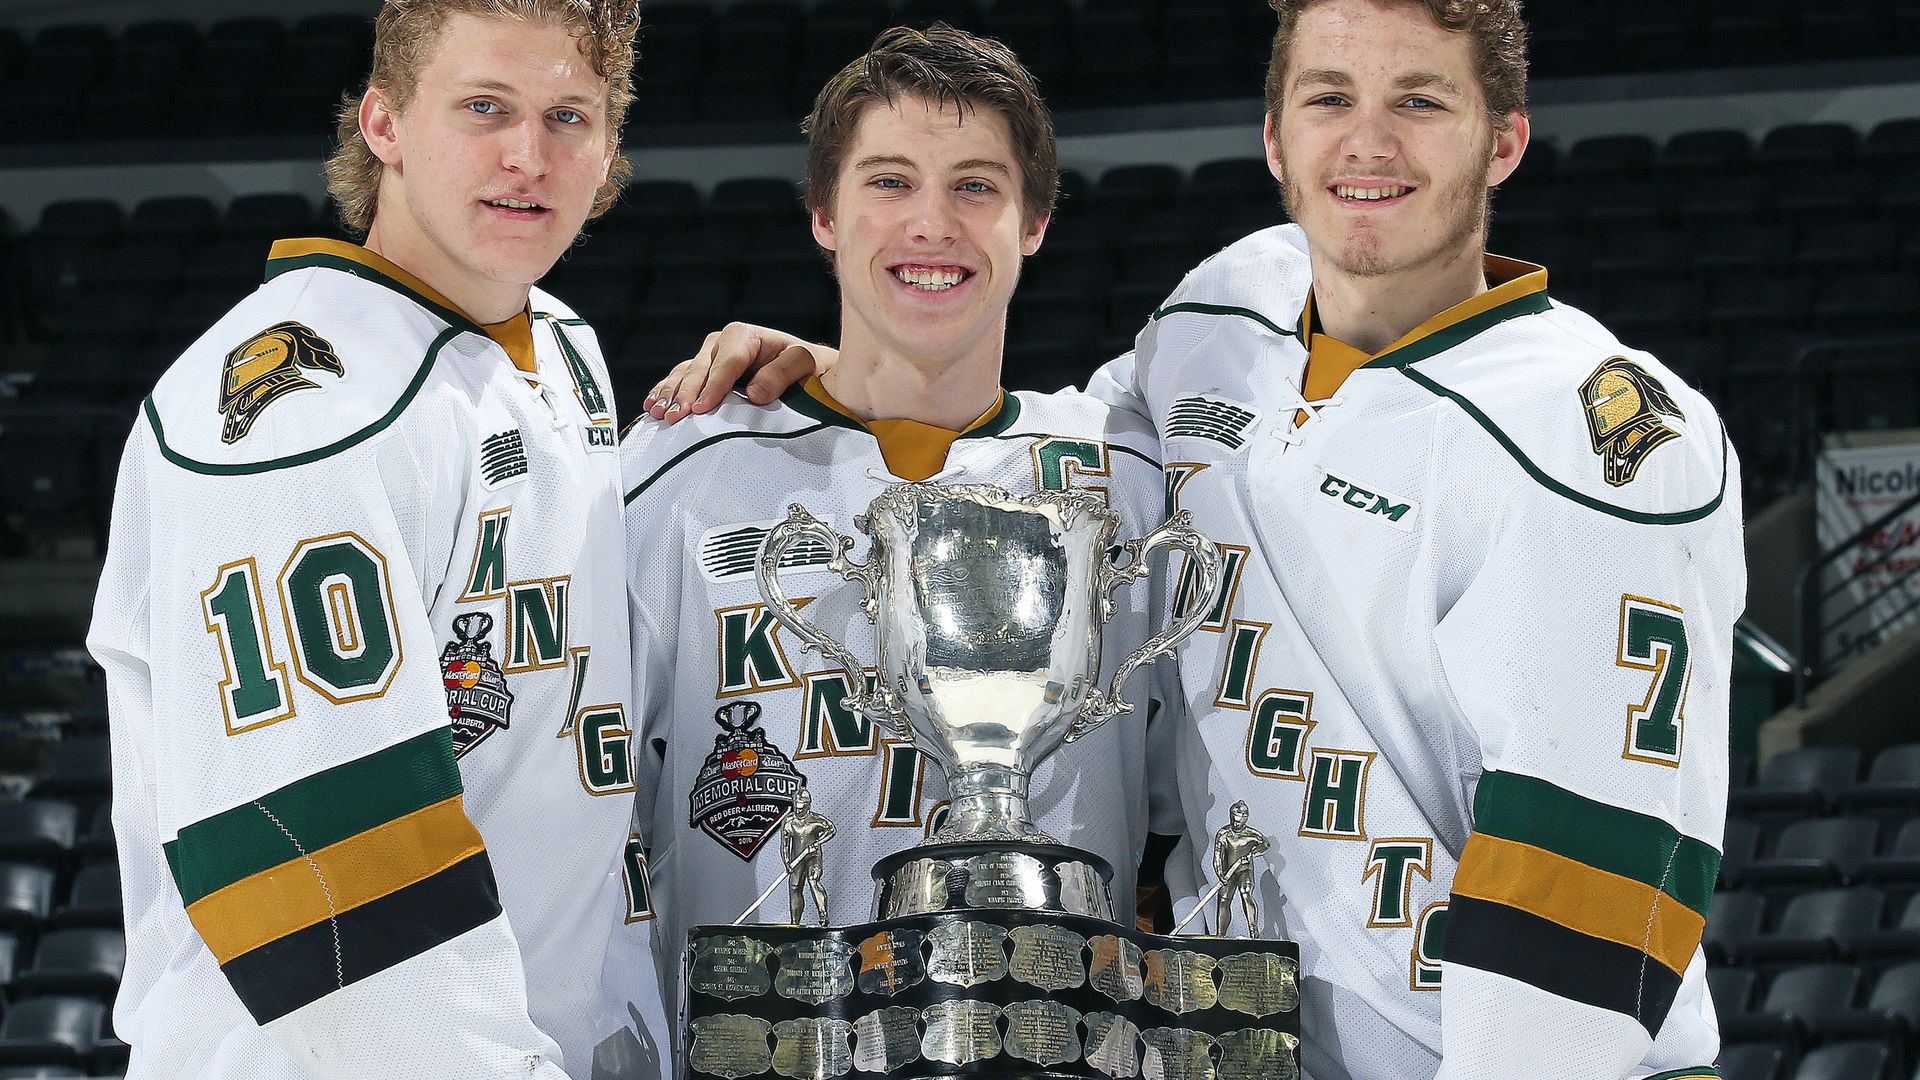 London Knights - Memorial Cup Champions